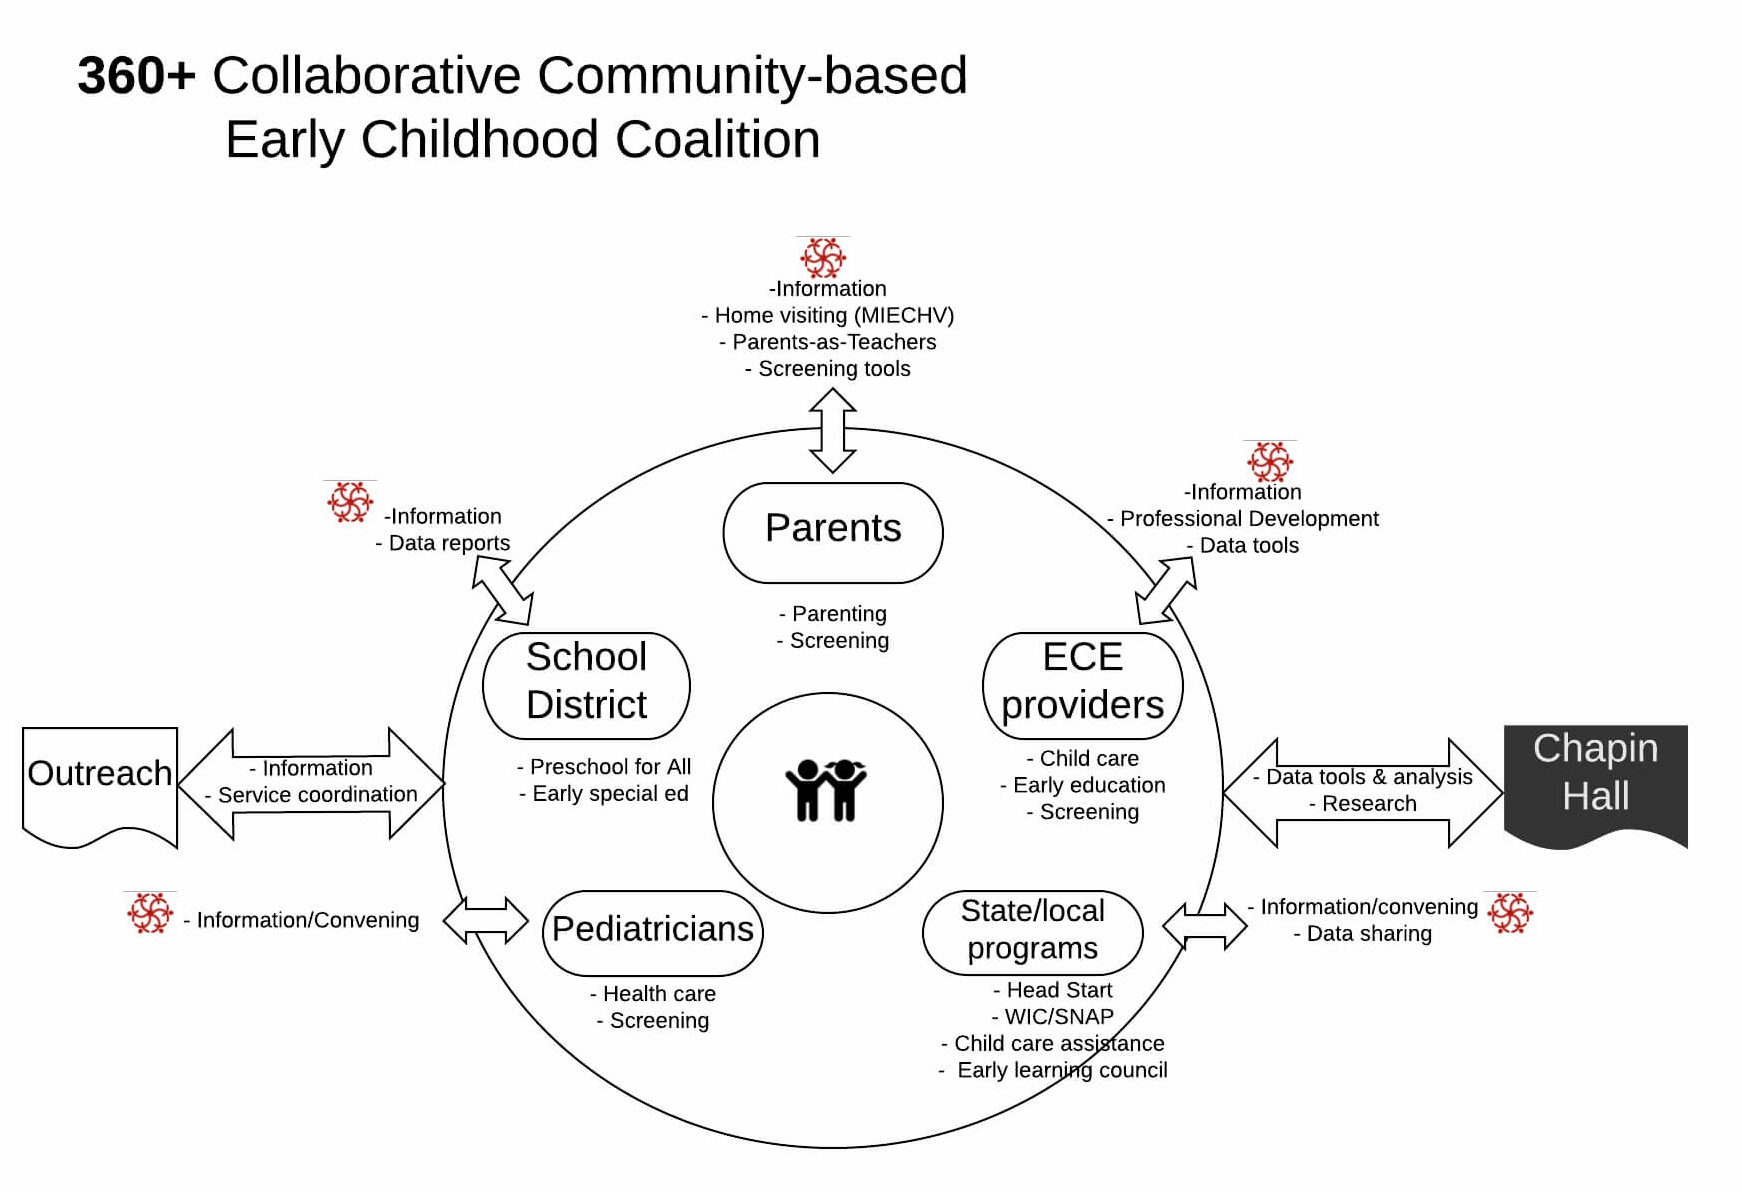 Chart describing early childhood coalition members and relationships.